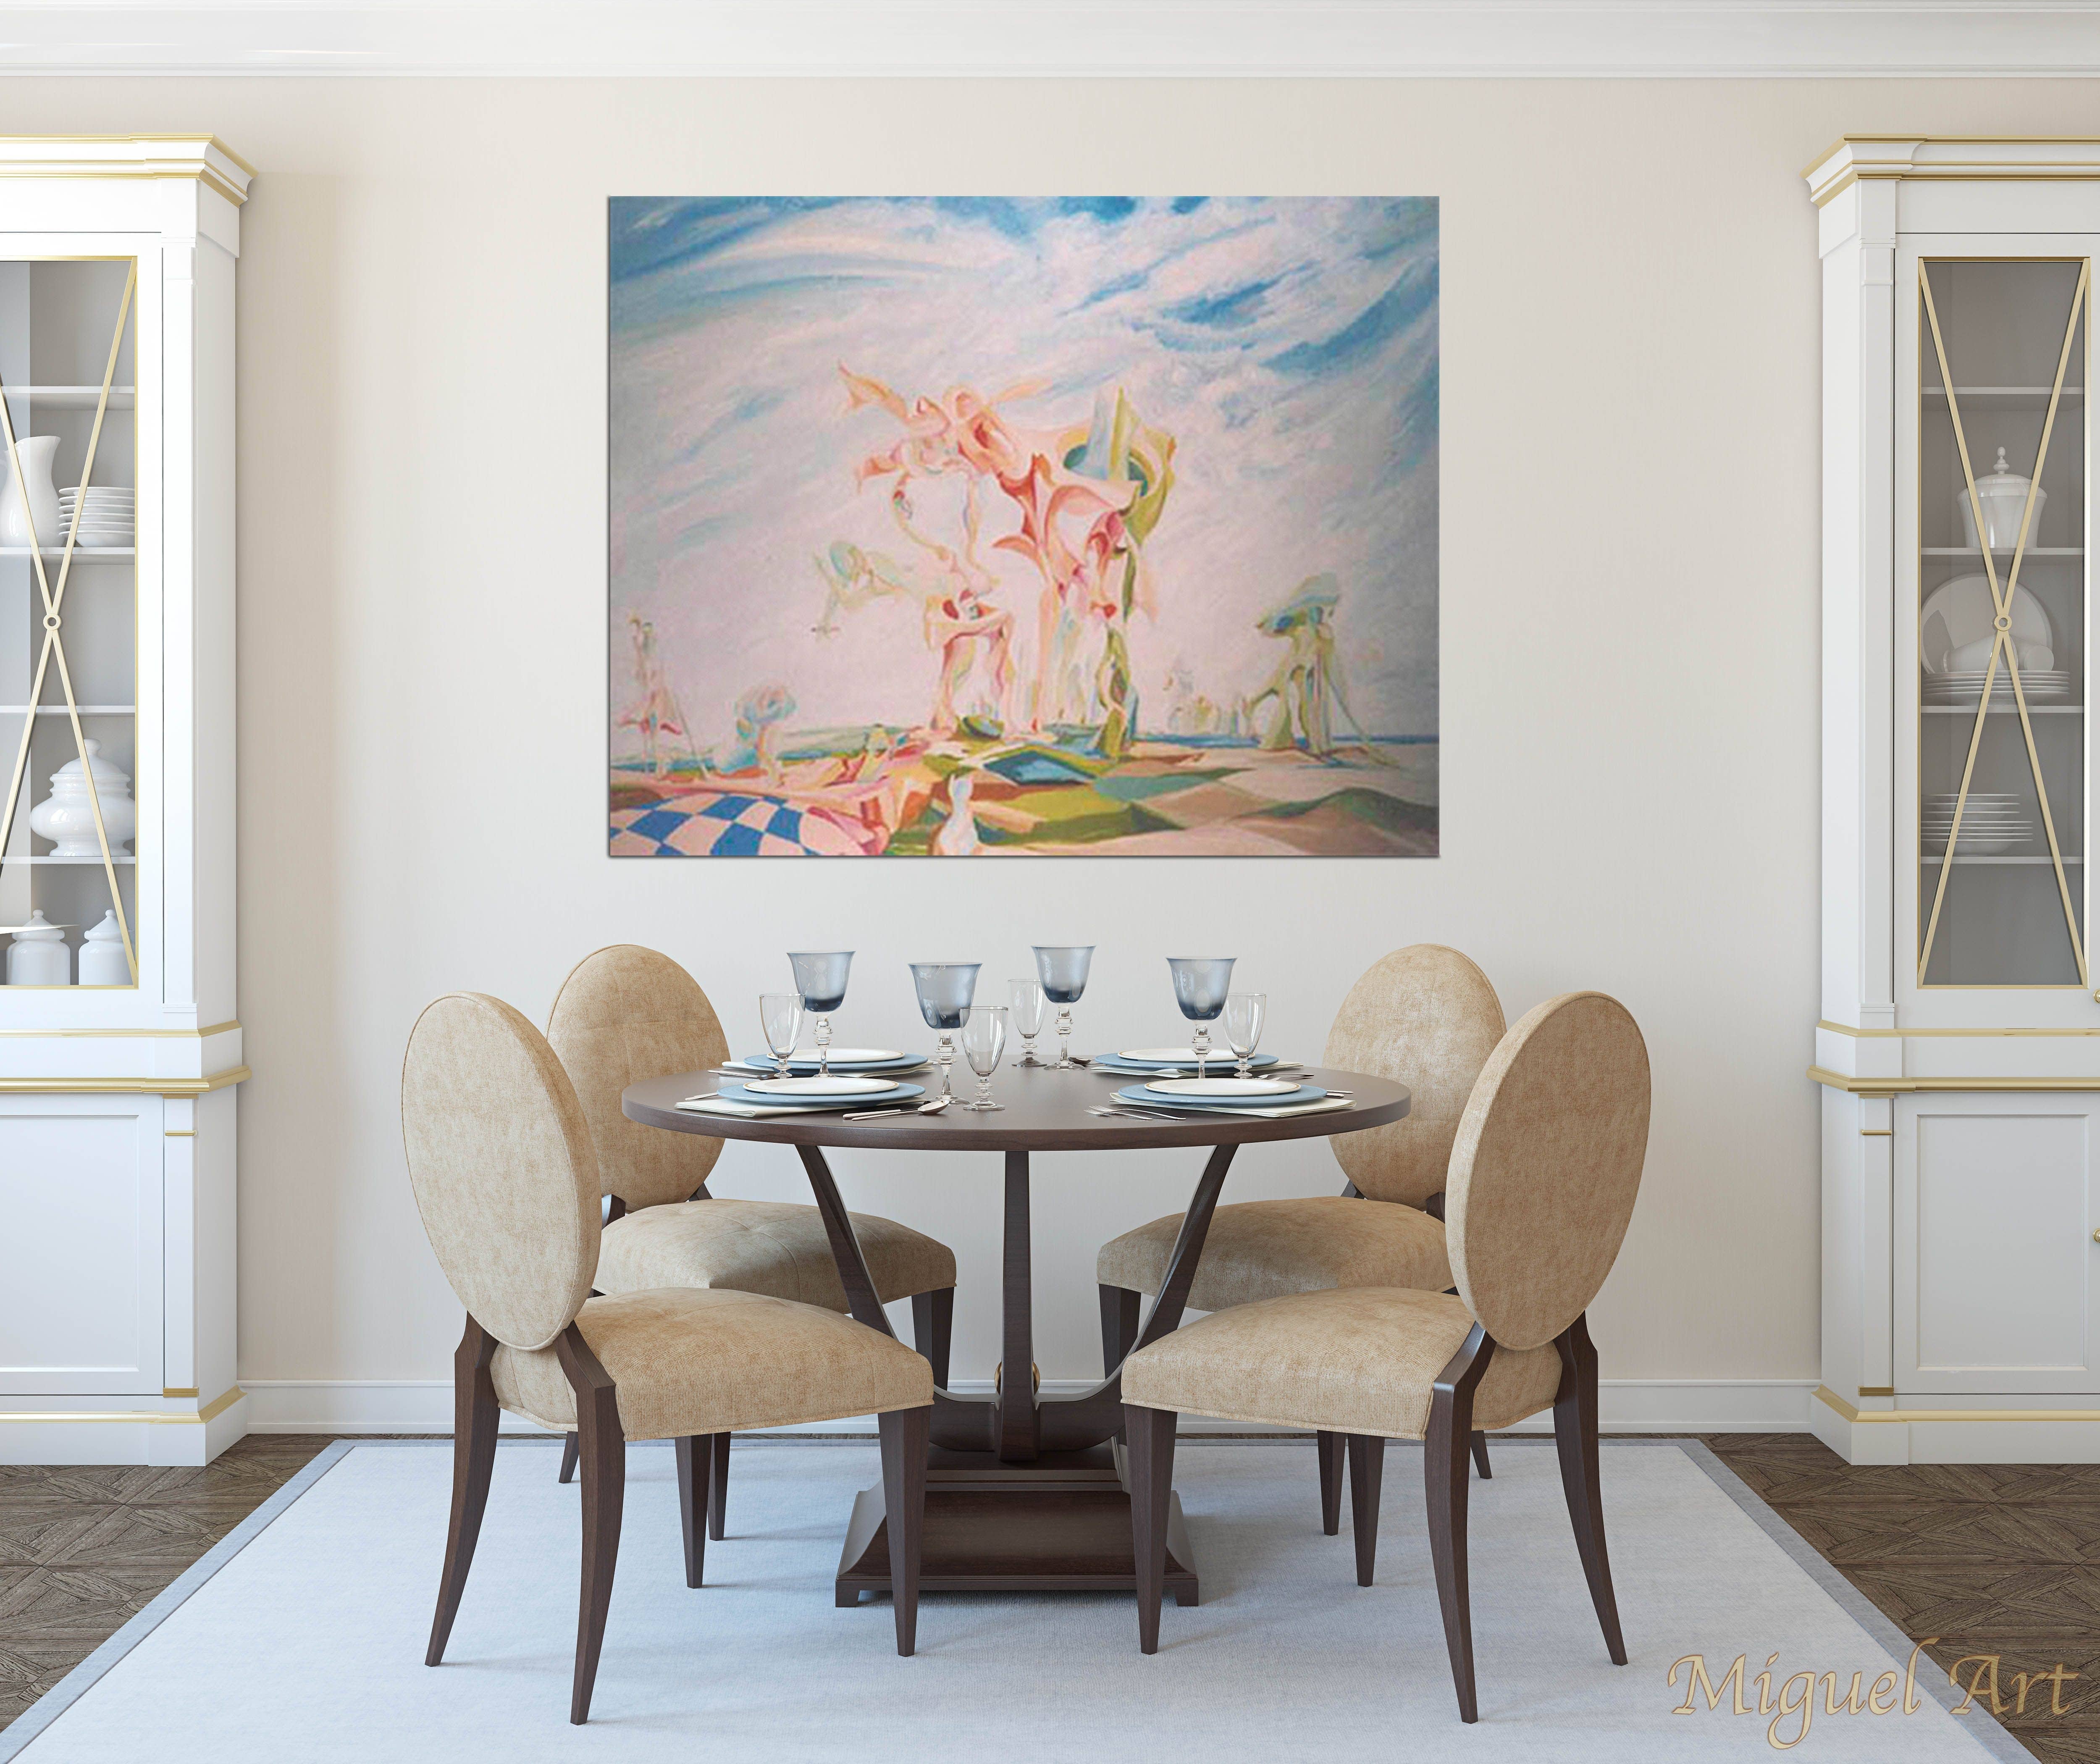 Painting of Skies displayed in a dining room on a cream wall